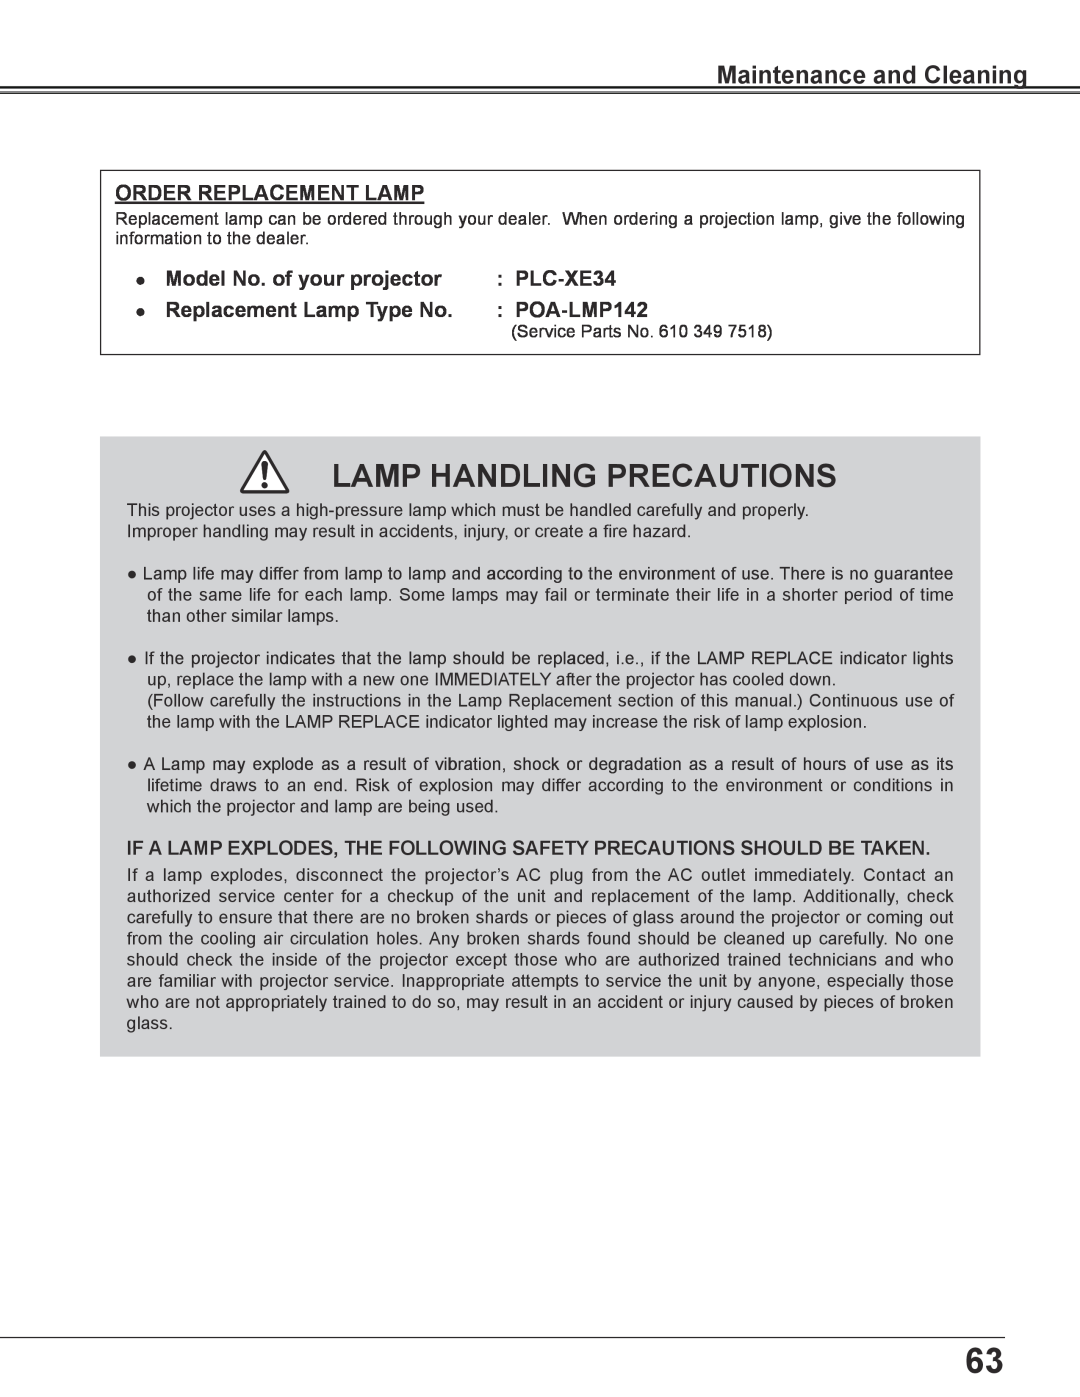 Sanyo PLC-XE34 Lamp Handling Precautions, Order Replacement Lamp, Model No.. of your projector, Replacement Lamp Type No 